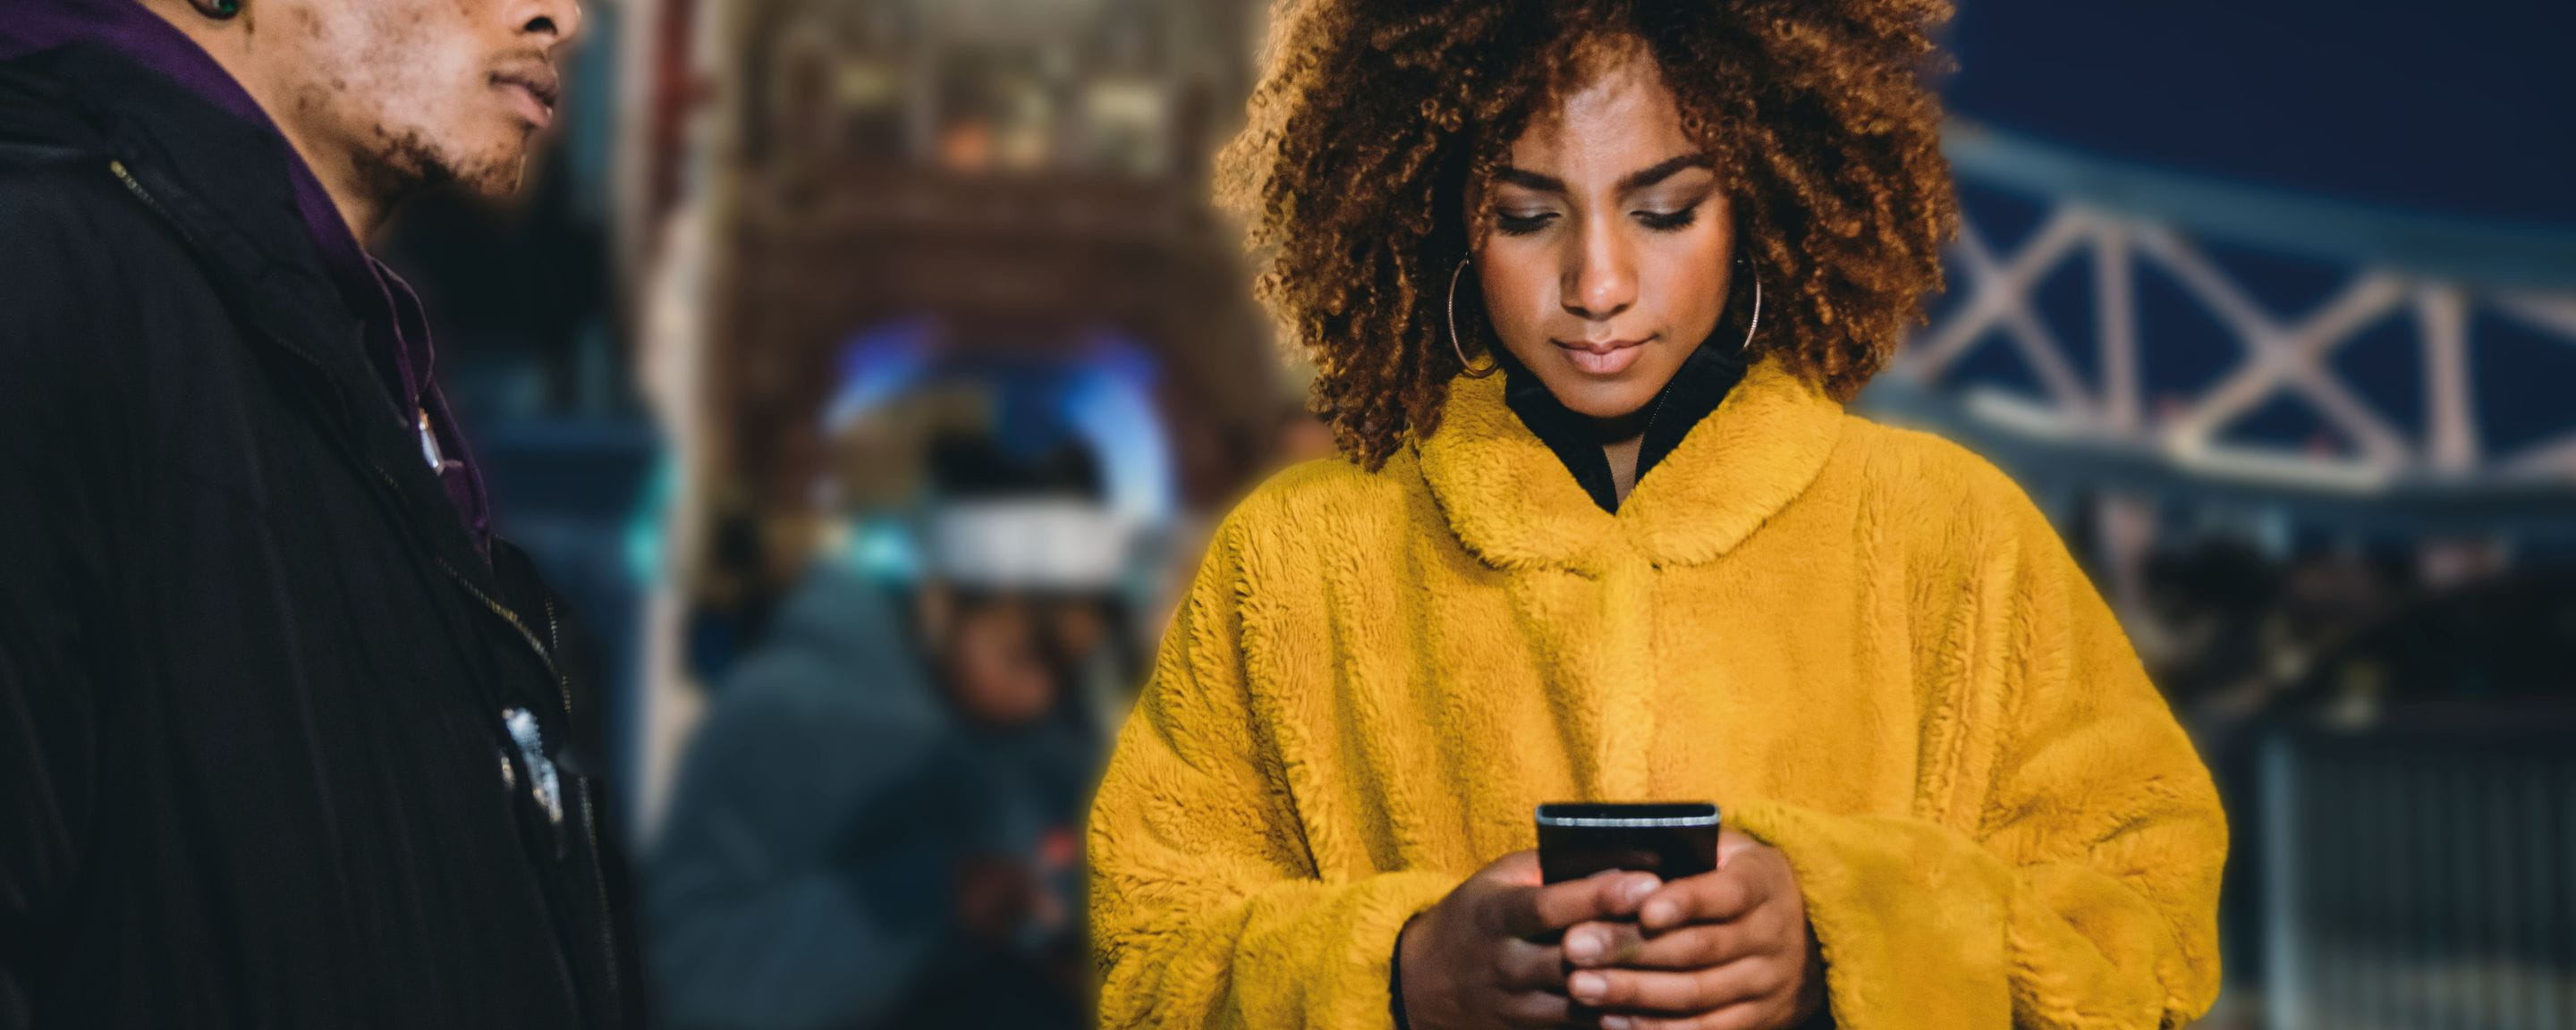 woman in yellow coat looking down at her phone